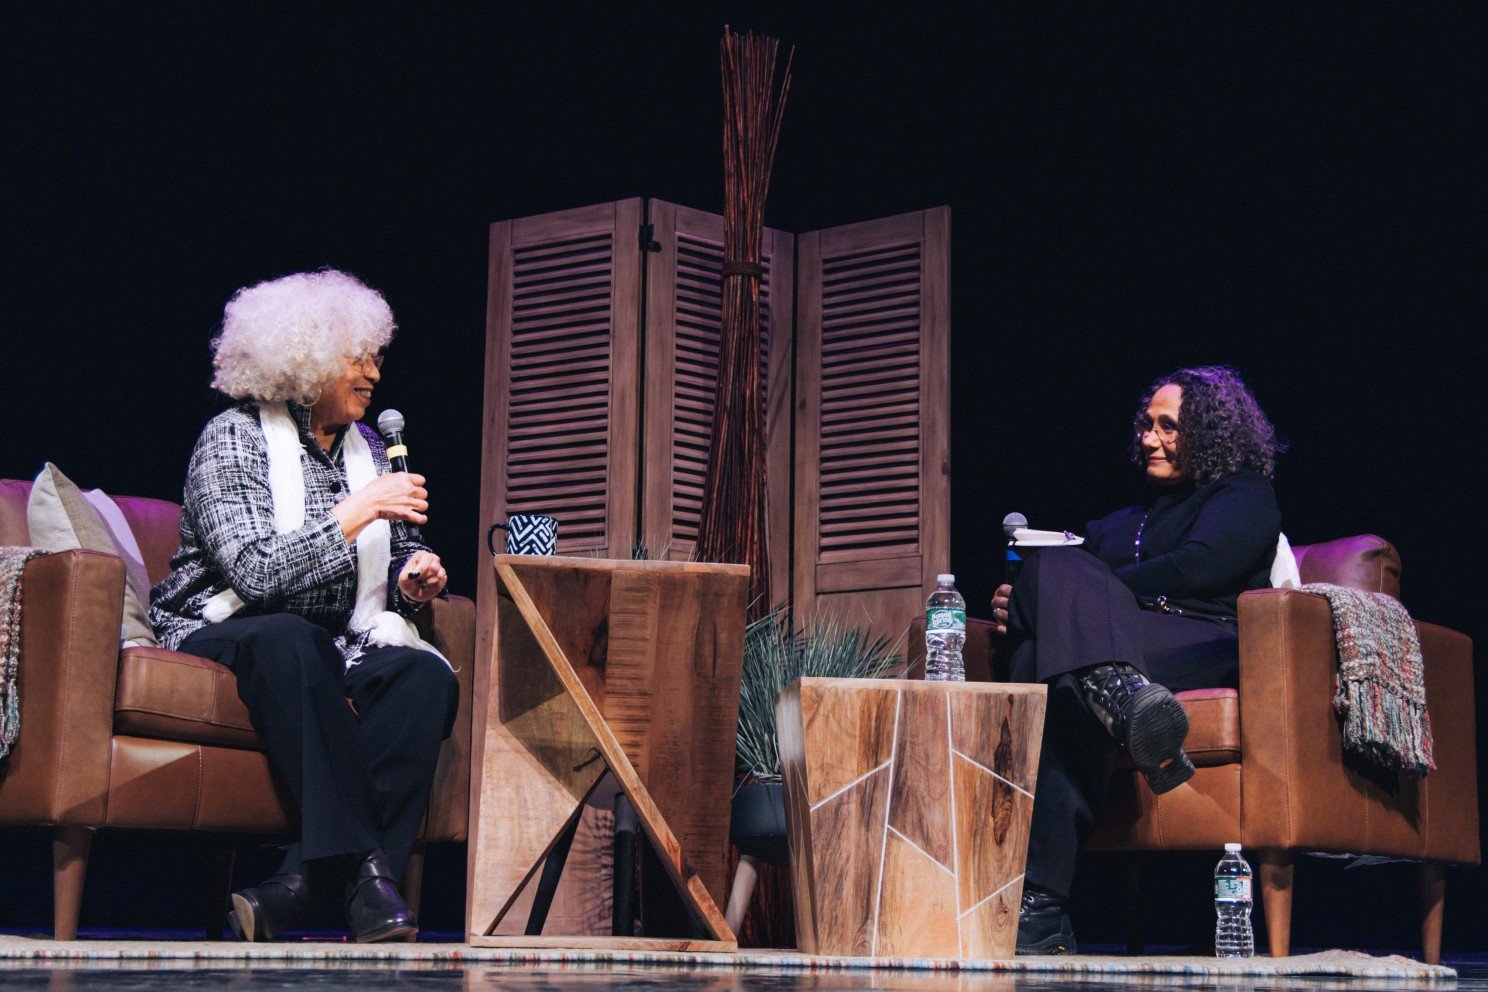 Angela Davis and Tricia Brown during their Fireside Discussion